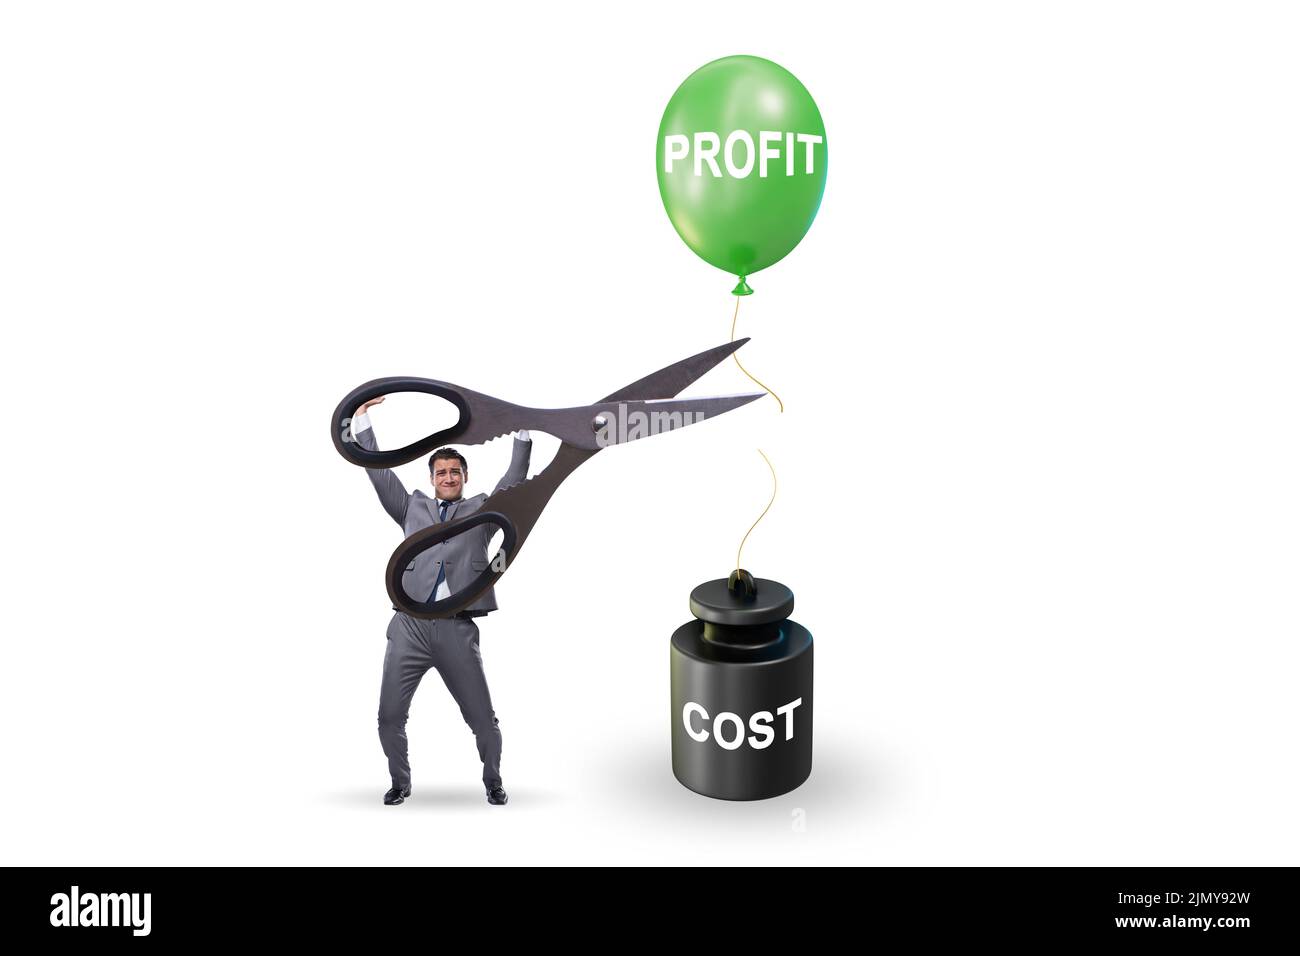 Concept of profit and cost with businessman Stock Photo